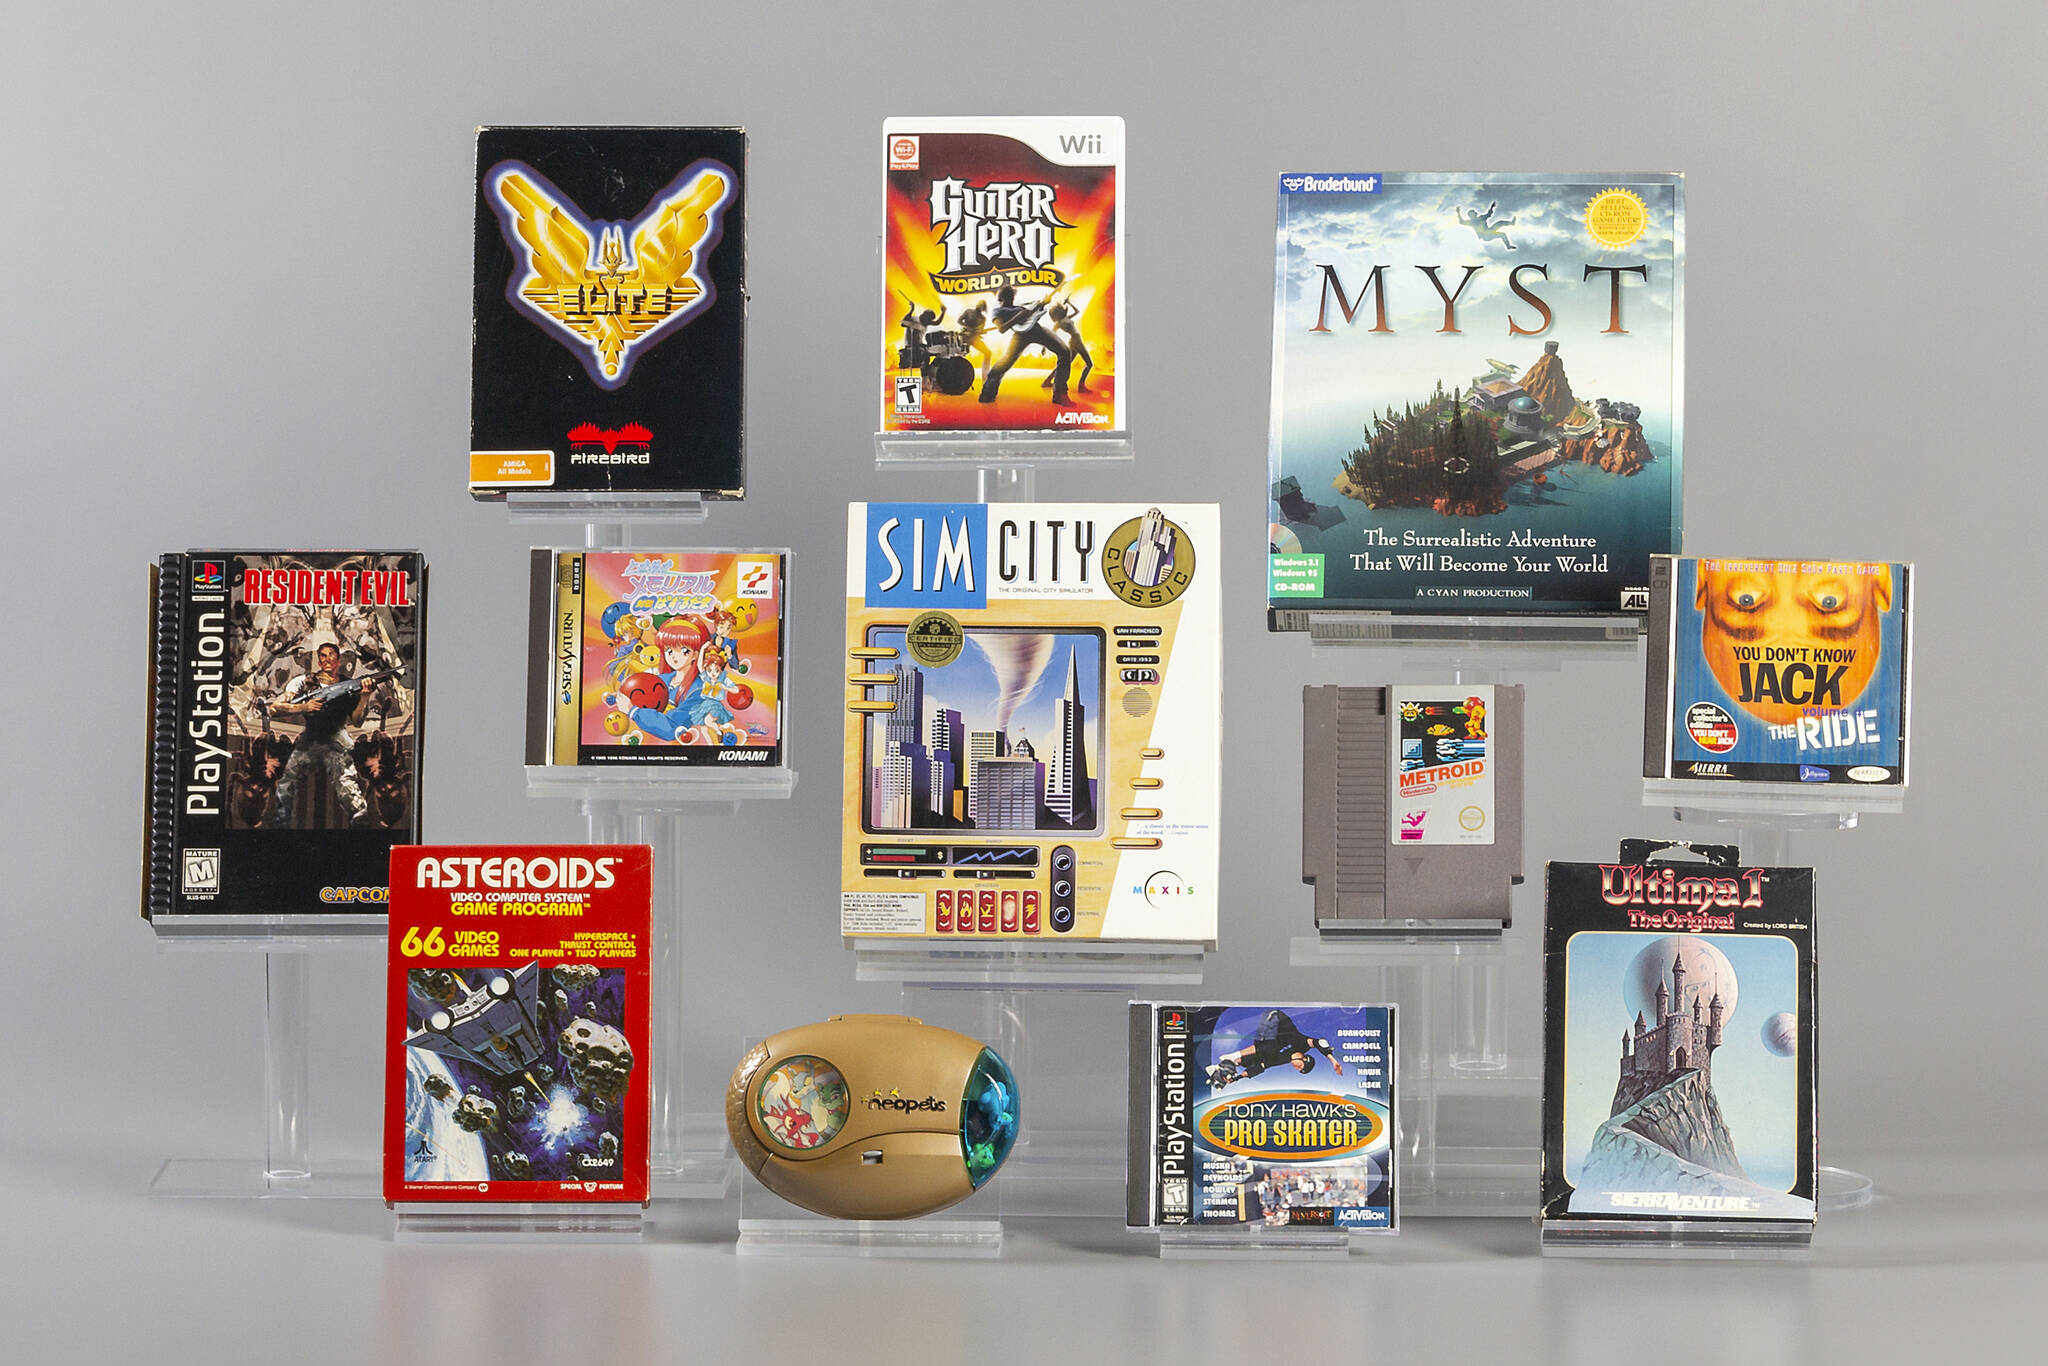 This image provided by The Strong shows 12 finalists being considered for induction into the World Video Game Hall of Fame in Rochester, N.Y. Asteroids, Elite, Guitar Hero, Metroid, Myst, Neopets, Resident Evil, SimCity, Tokimeki Memorial, Tony Hawk’s Pro Skater, Ultima, and You Don’t Know Jack. Three or four of the finalists will be inducted in May following voting by a panel of judges and the public. (Evyn Morgan/The Strong via AP)